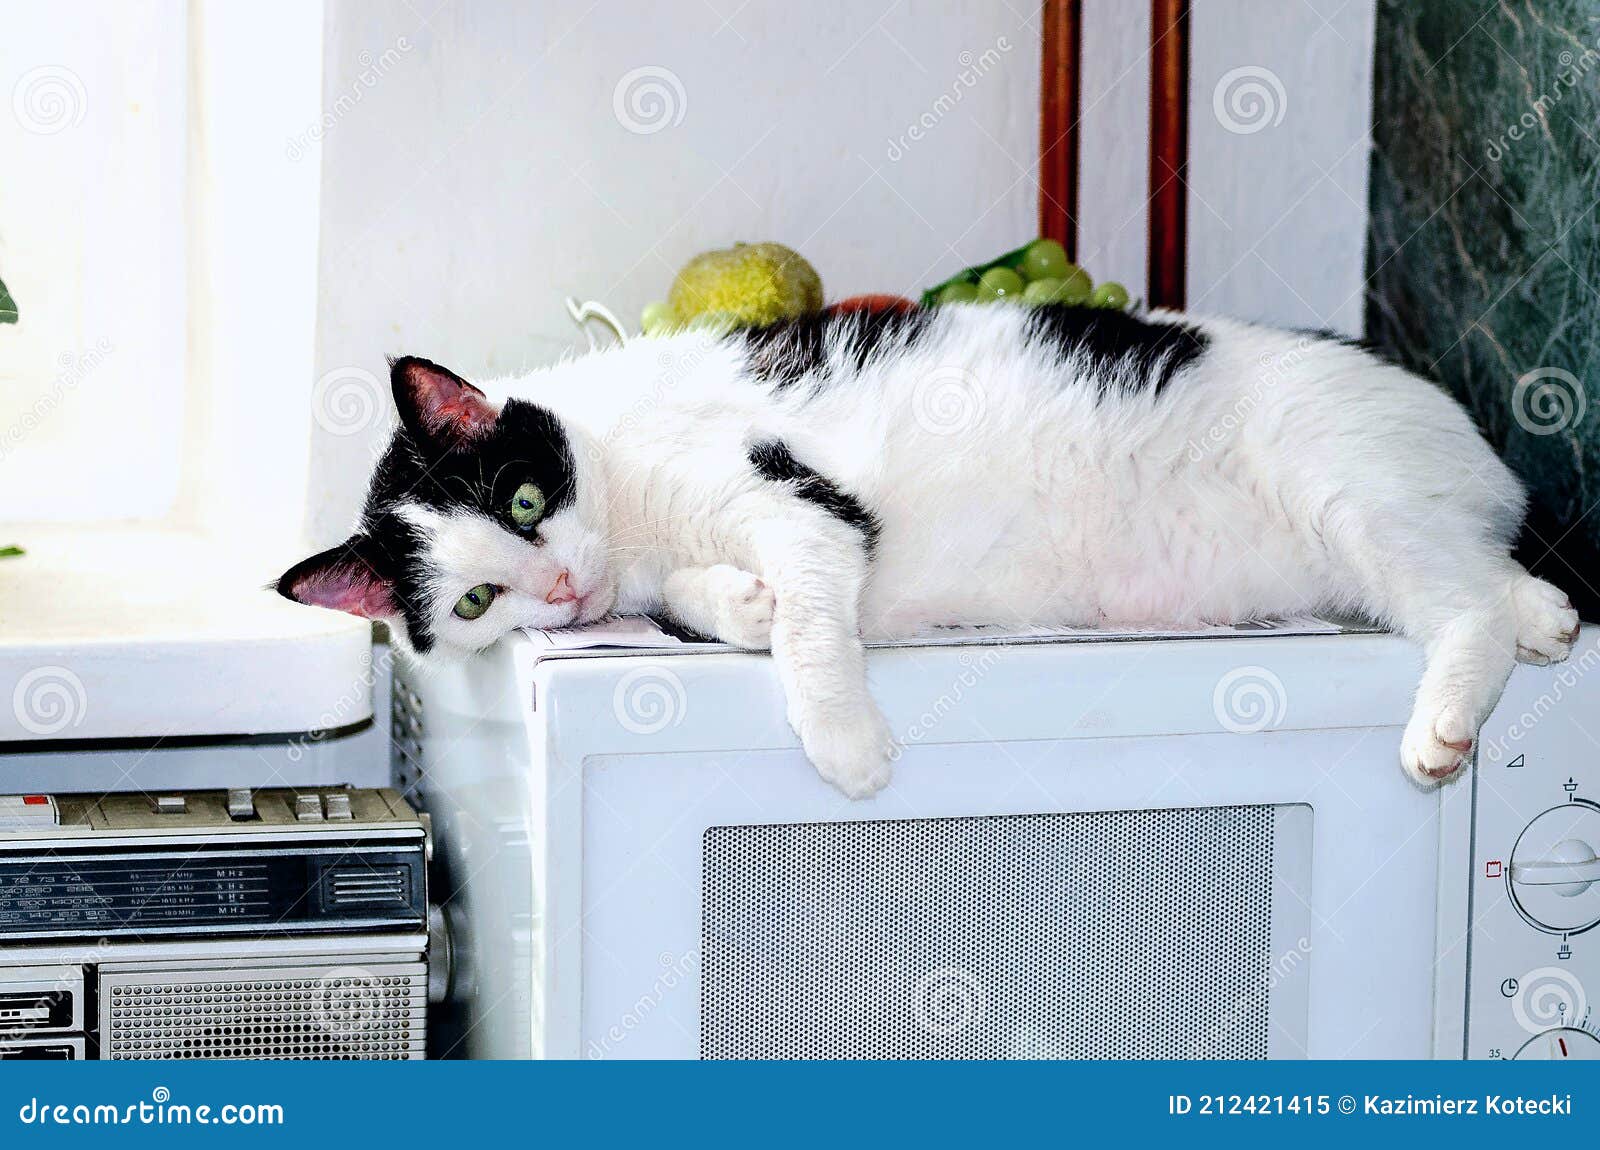 white-cat-with-black-patches-on-your-favorite-den-of-a-microwave-oven